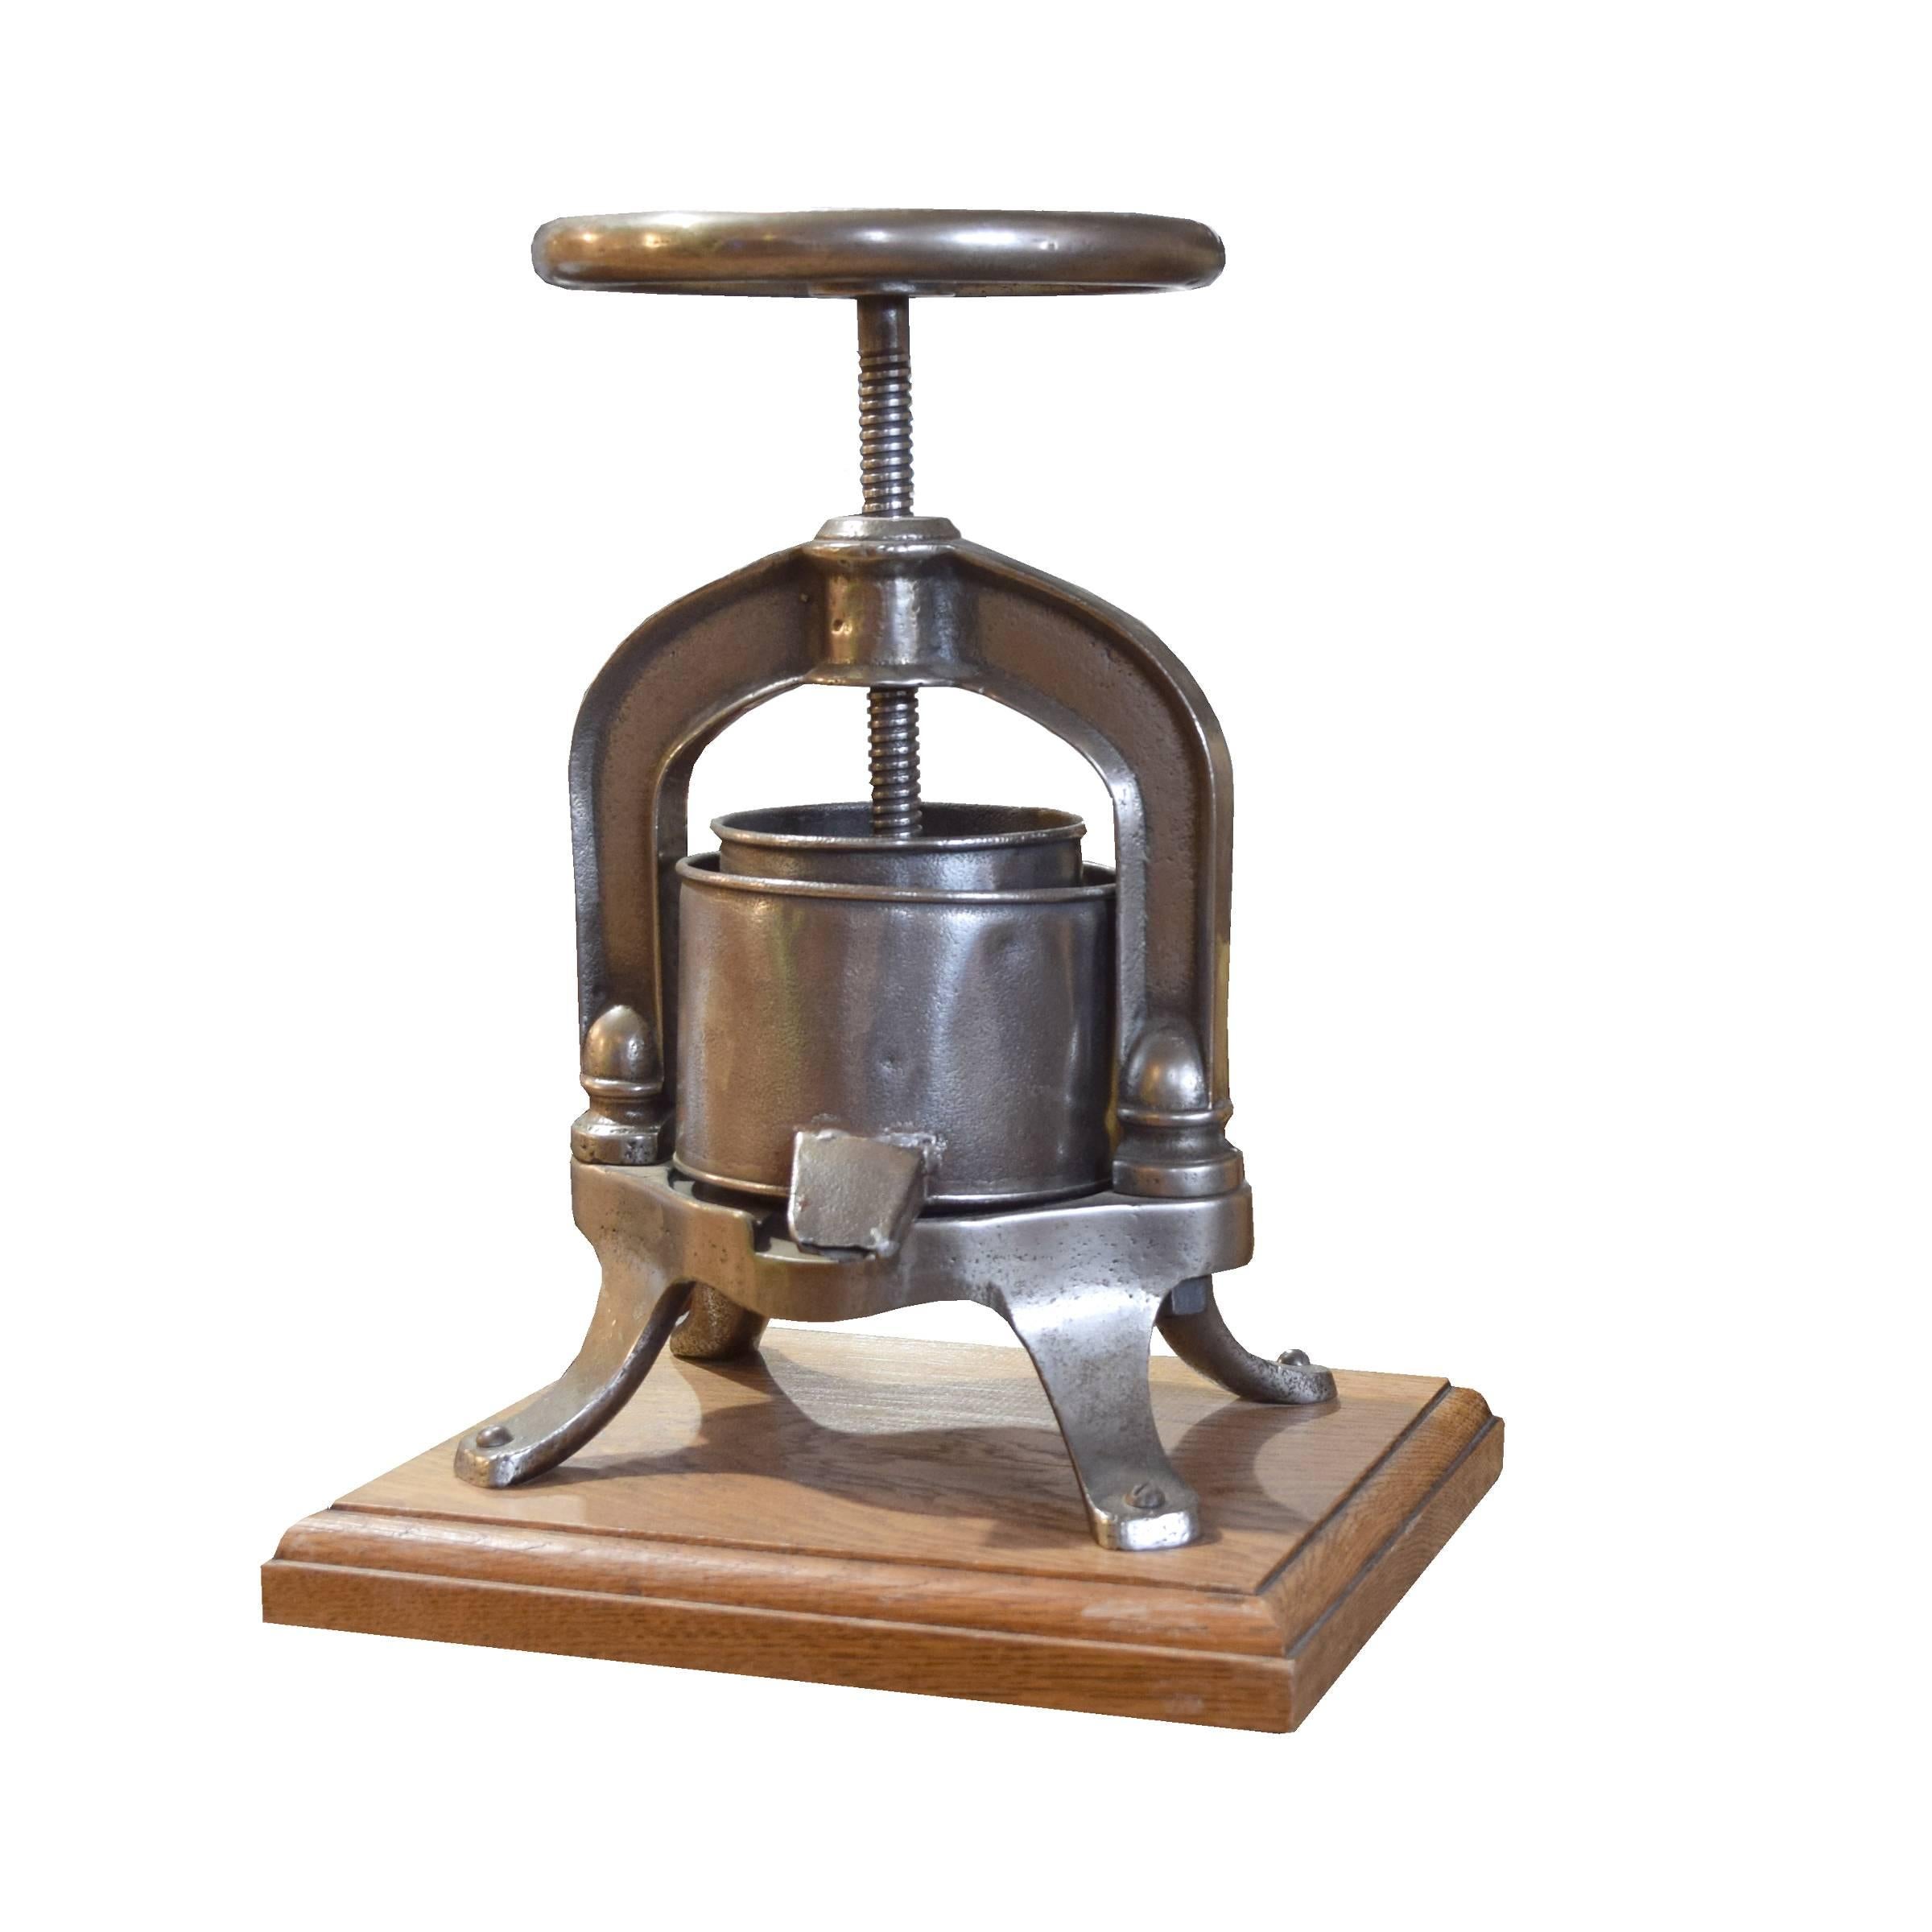 A fun French polished iron food press on a newer oak base, 19th century. Perfect for the foodie in your life!